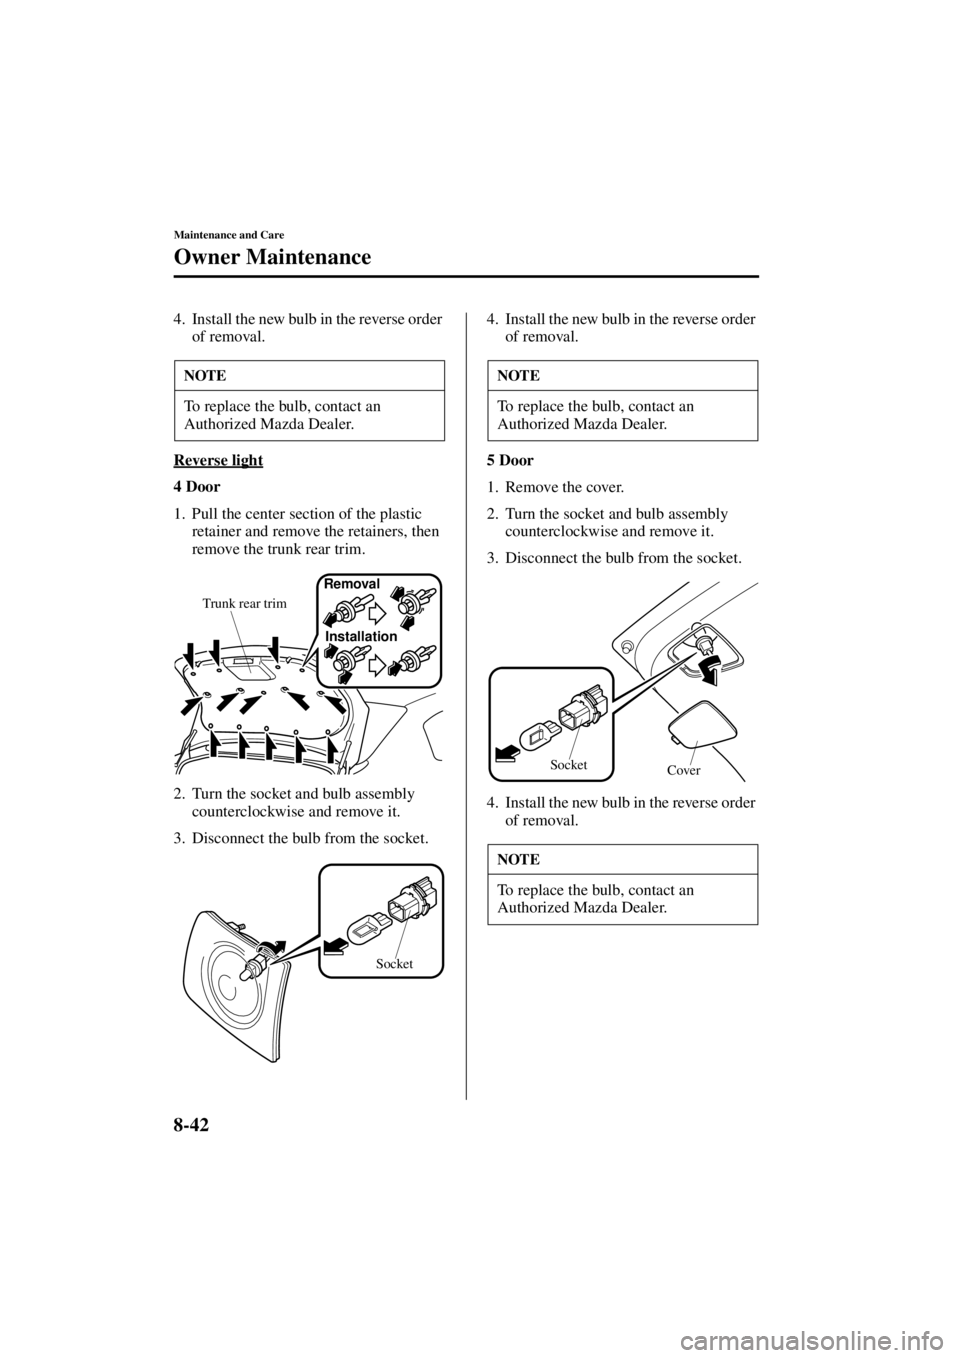 MAZDA MODEL 3 4-DOOR 2004  Owners Manual 8-42
Maintenance and Care
Owner Maintenance
Form No. 8S18-EA-03I
4. Install the new bulb in the reverse order of removal.
Reverse light
4 Door
1. Pull the center section of the plastic  retainer and r